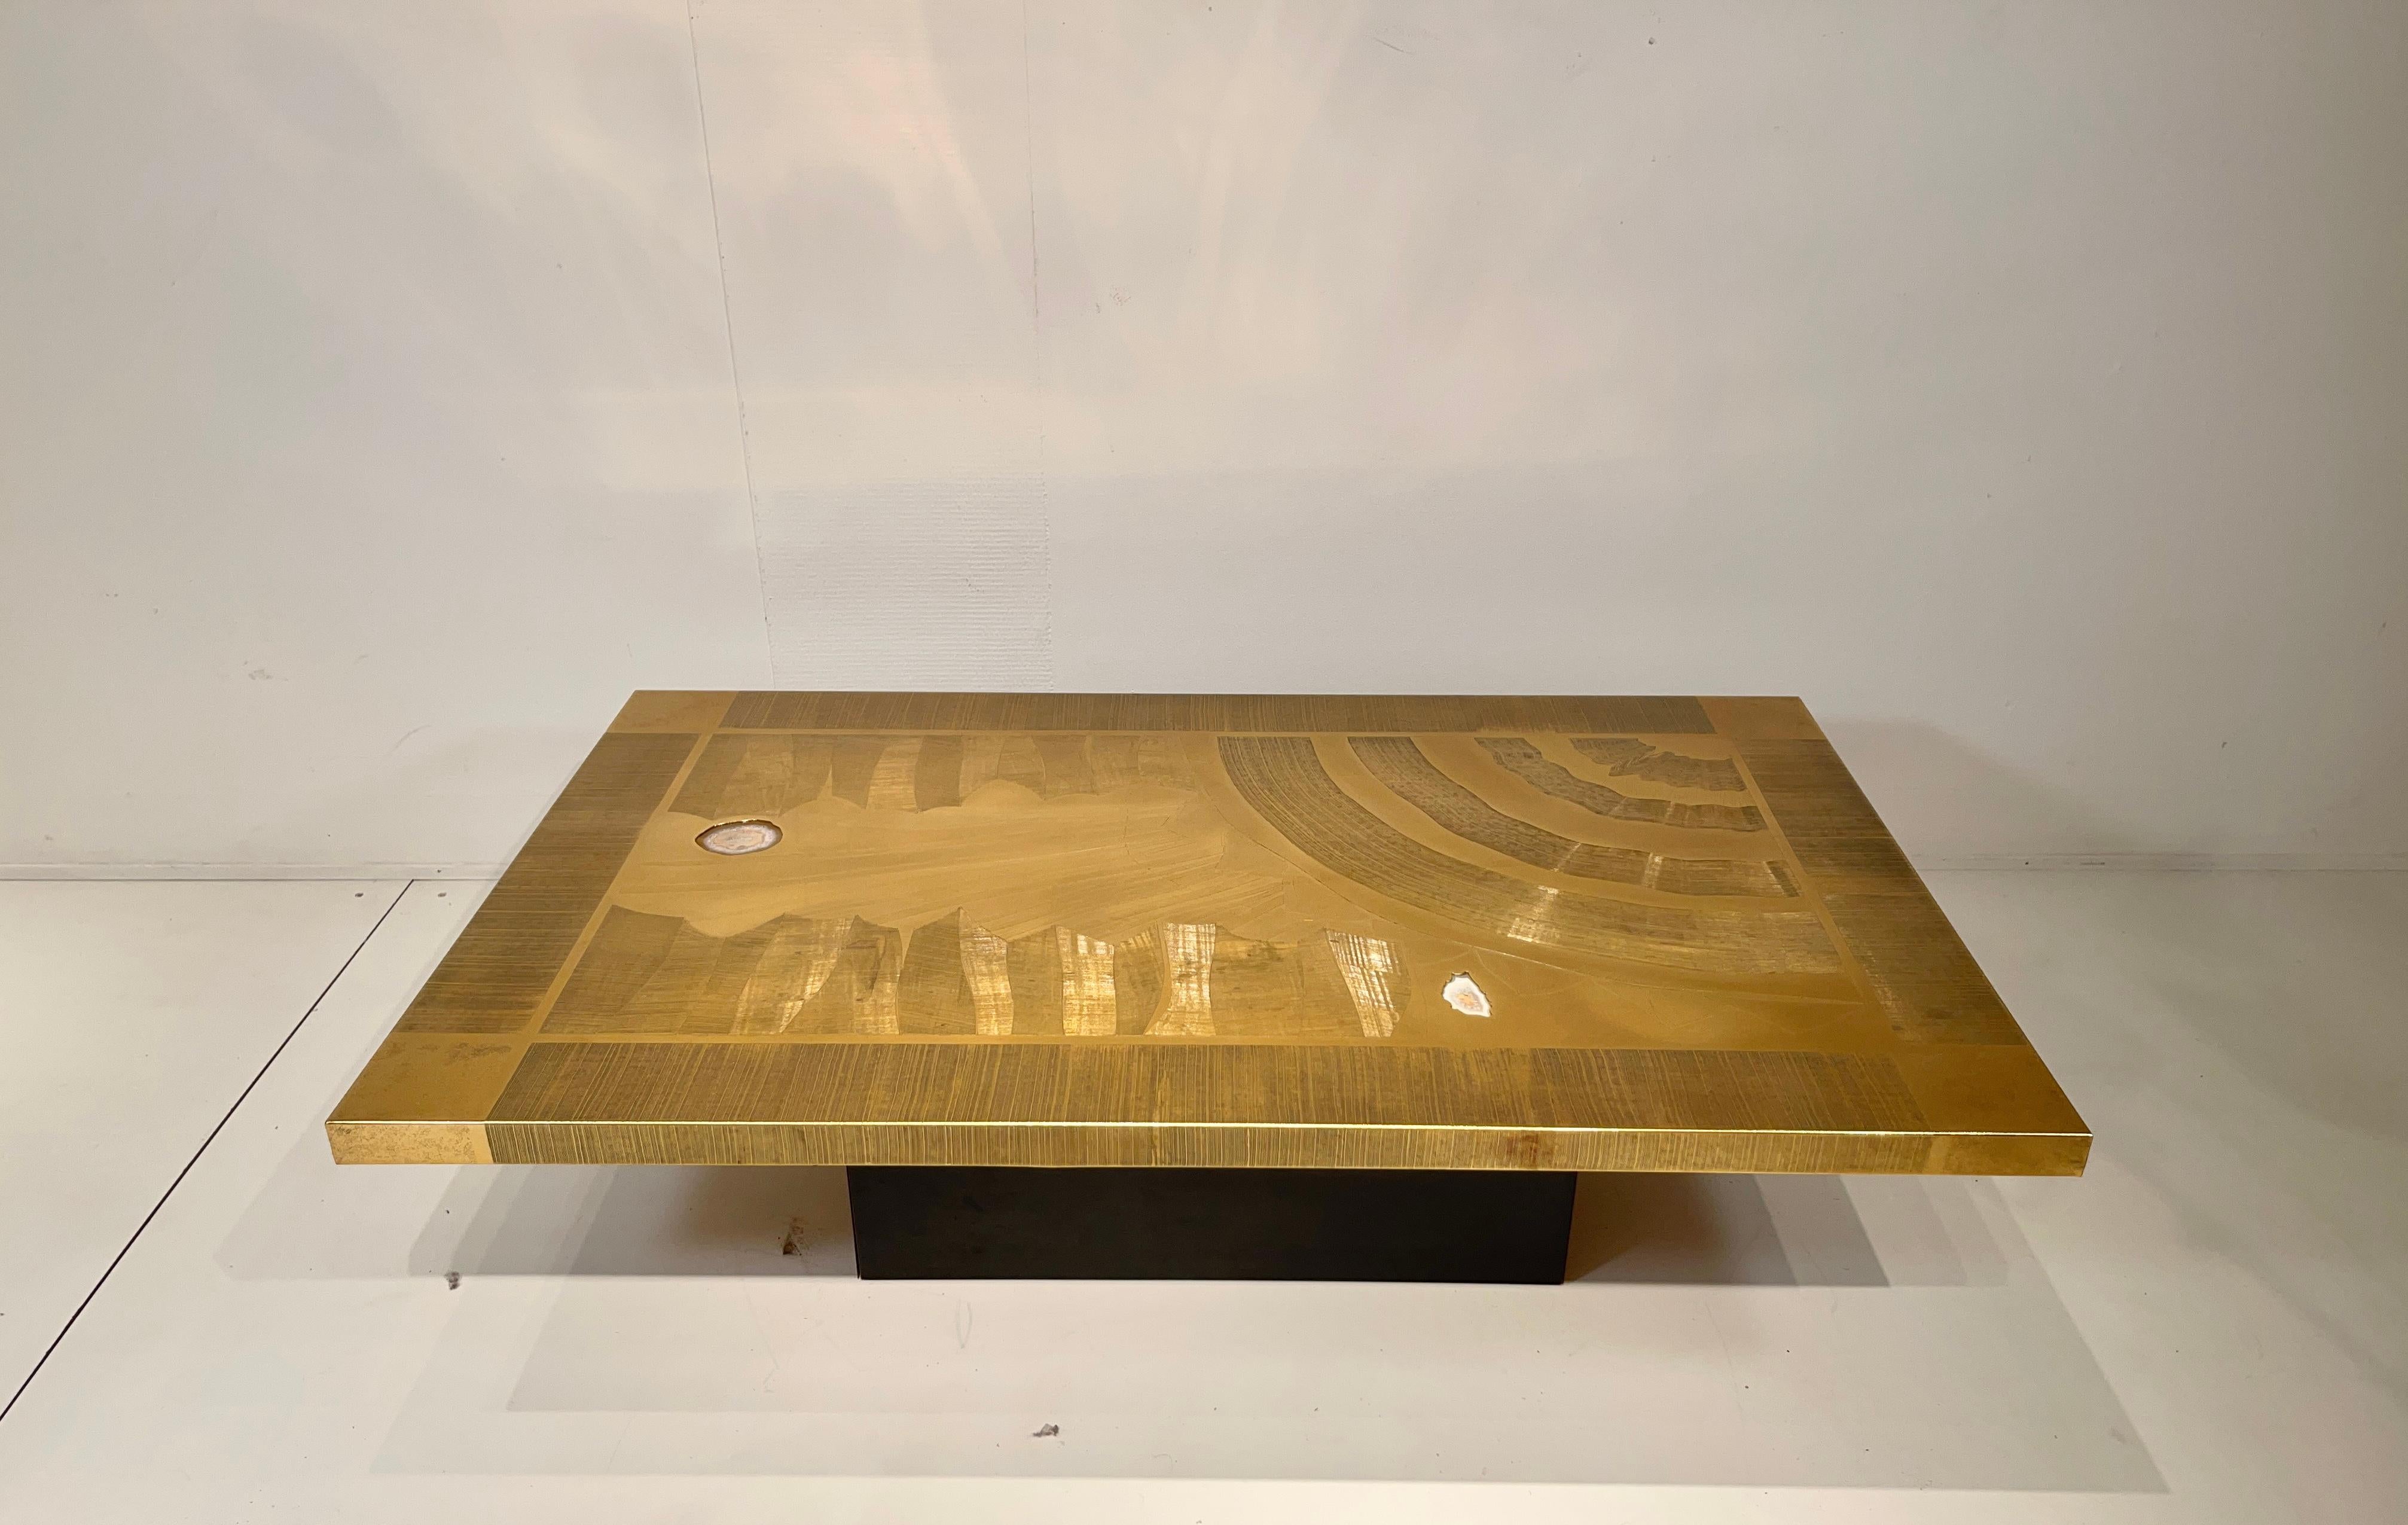 Christian Krekels Etched Brass Coffee Table Inlaid 2 Agates, circa 1977 In Excellent Condition For Sale In Brussels, BE